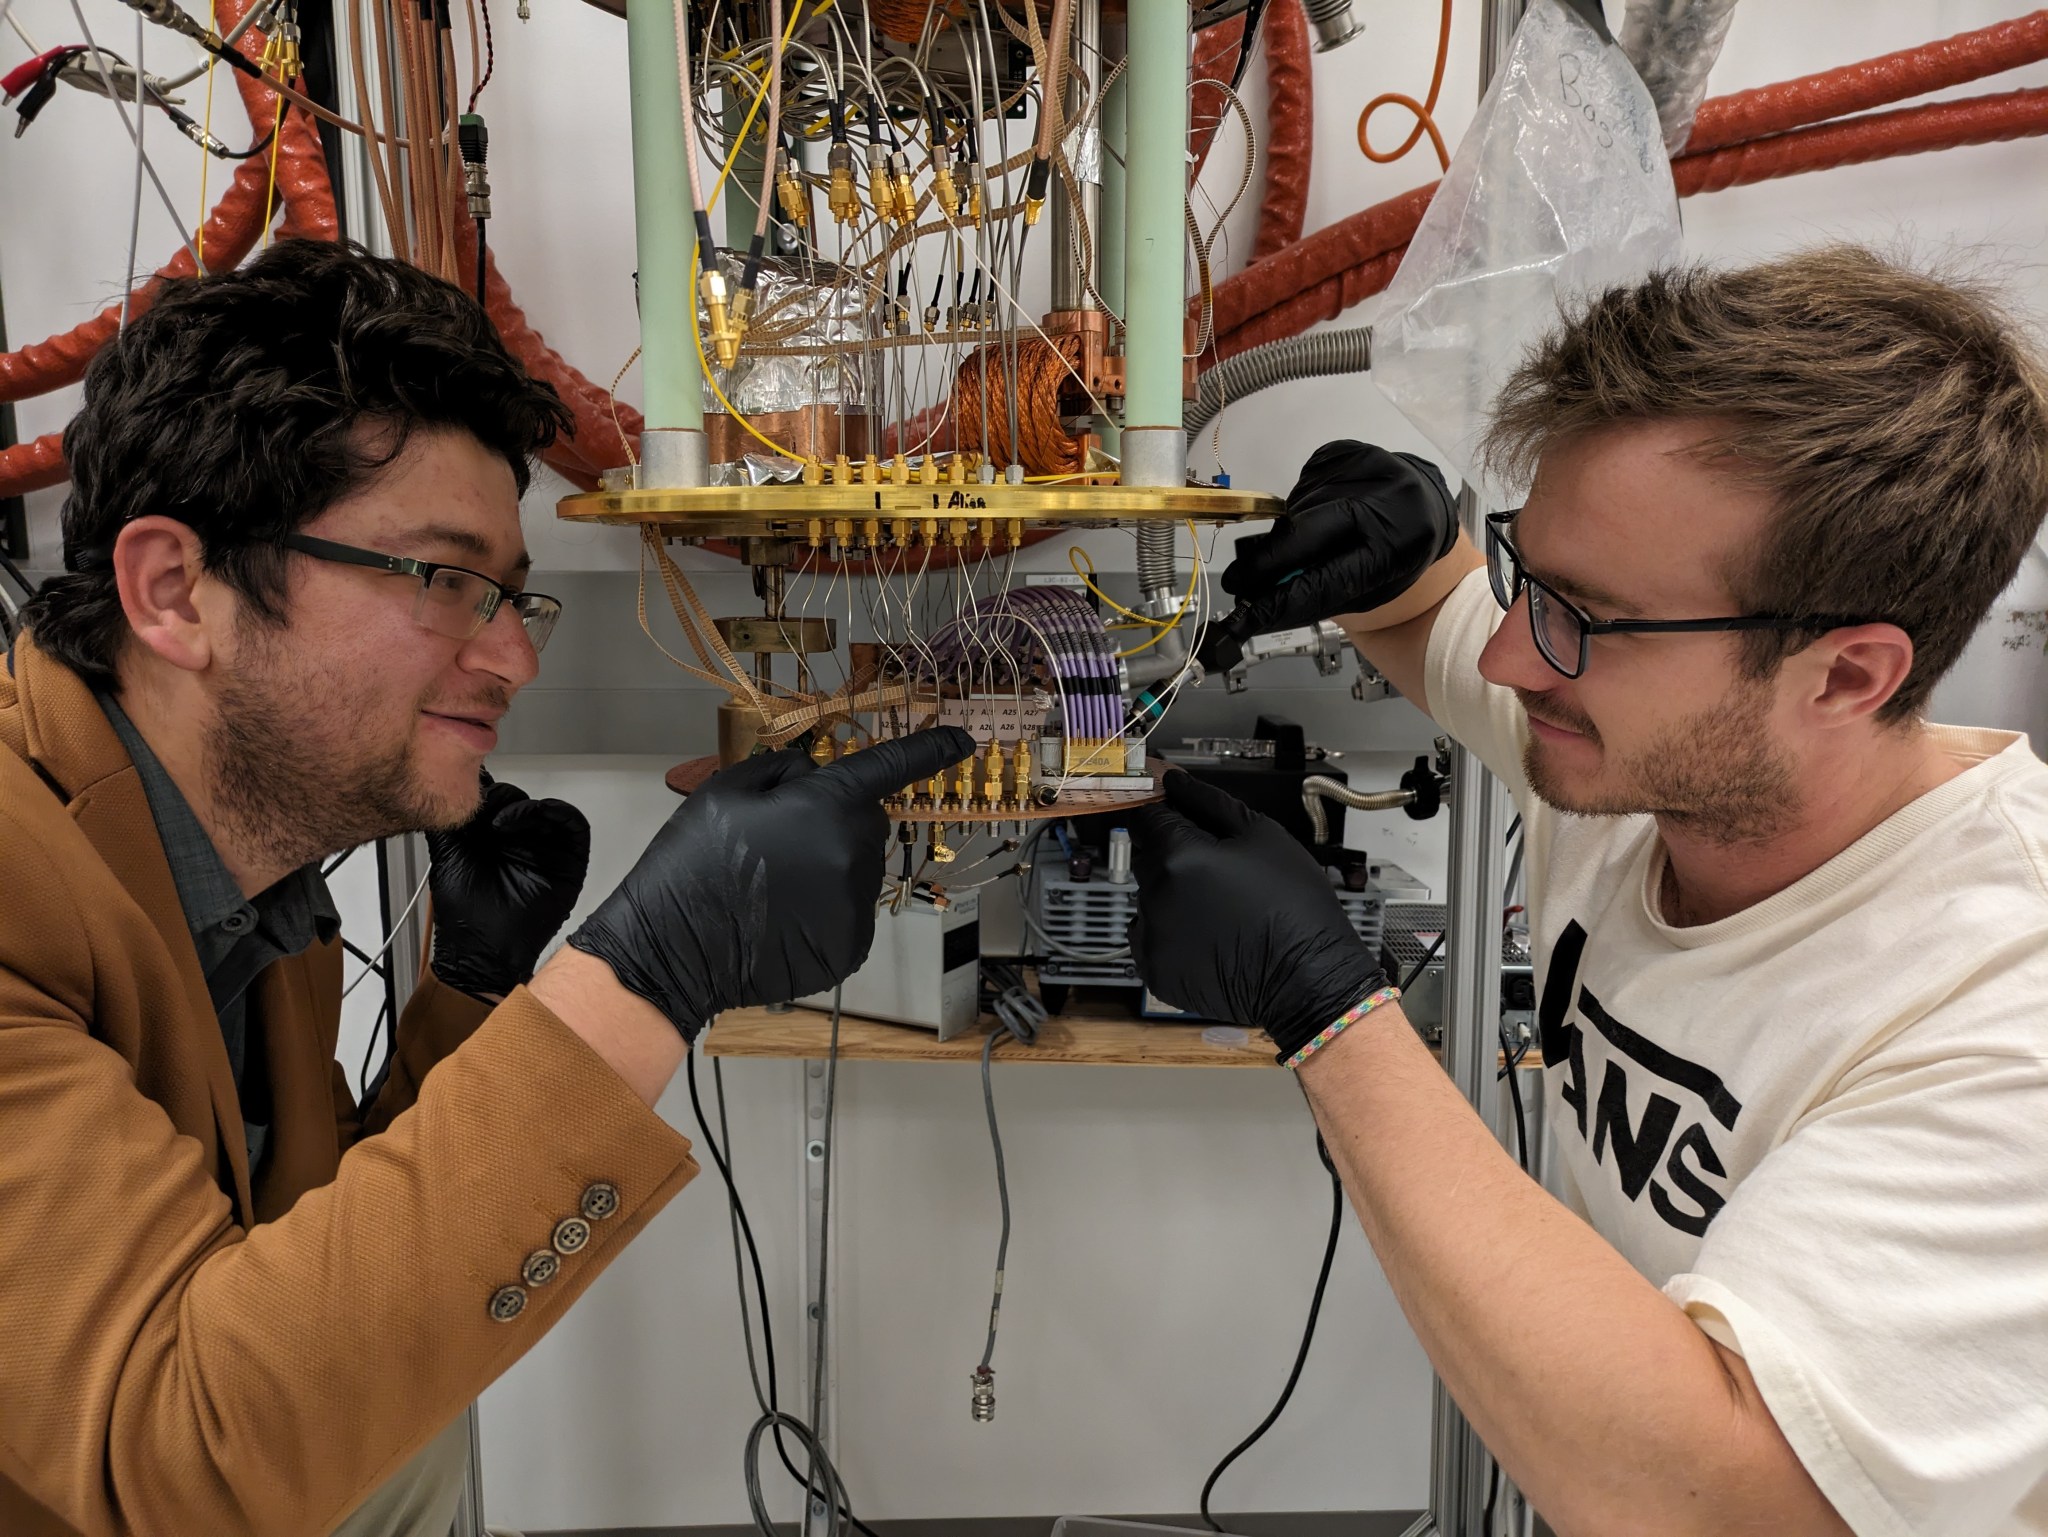 Two NIST team members stand beside an exposed cryogenic refrigerator, wearing gloves while affixing an aluminum sample box with wires coming out of it to a copper sample stage